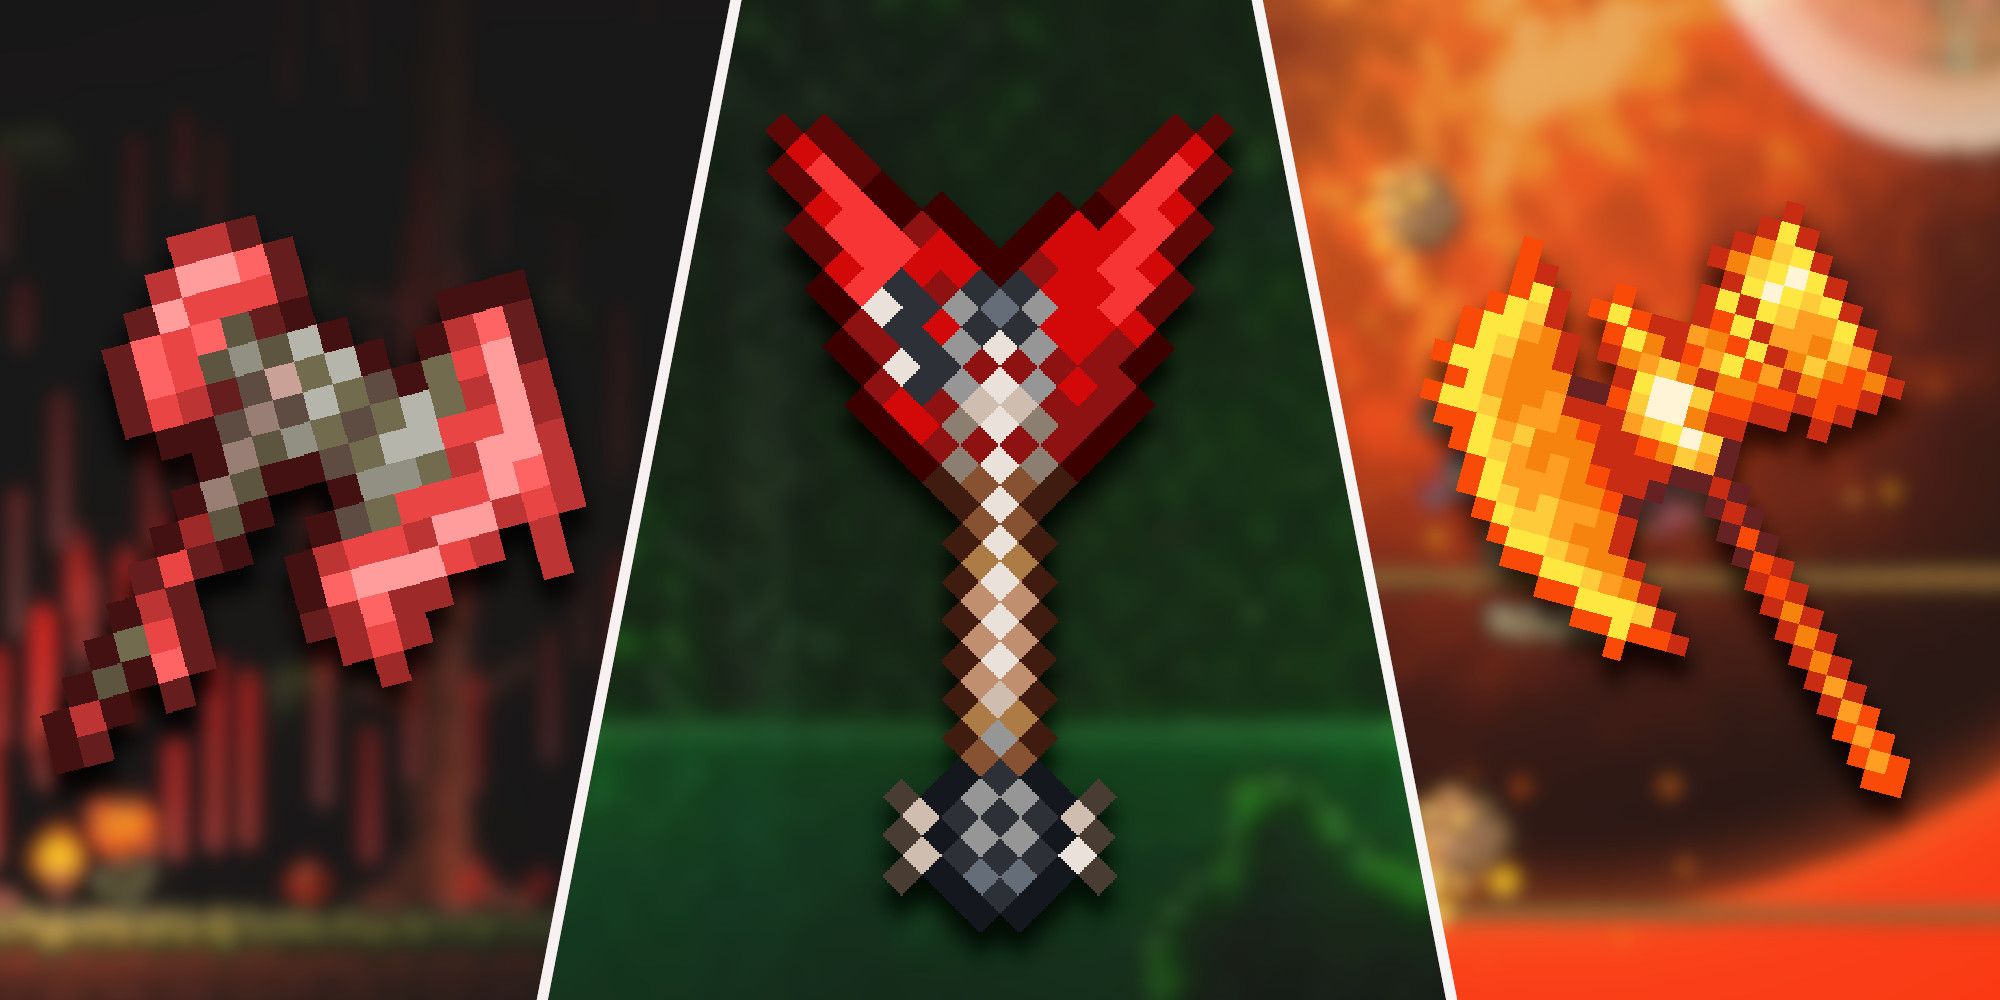 Haemorrhaxe, The Axe, and Solar Flare Hamaxes, From Left To Right